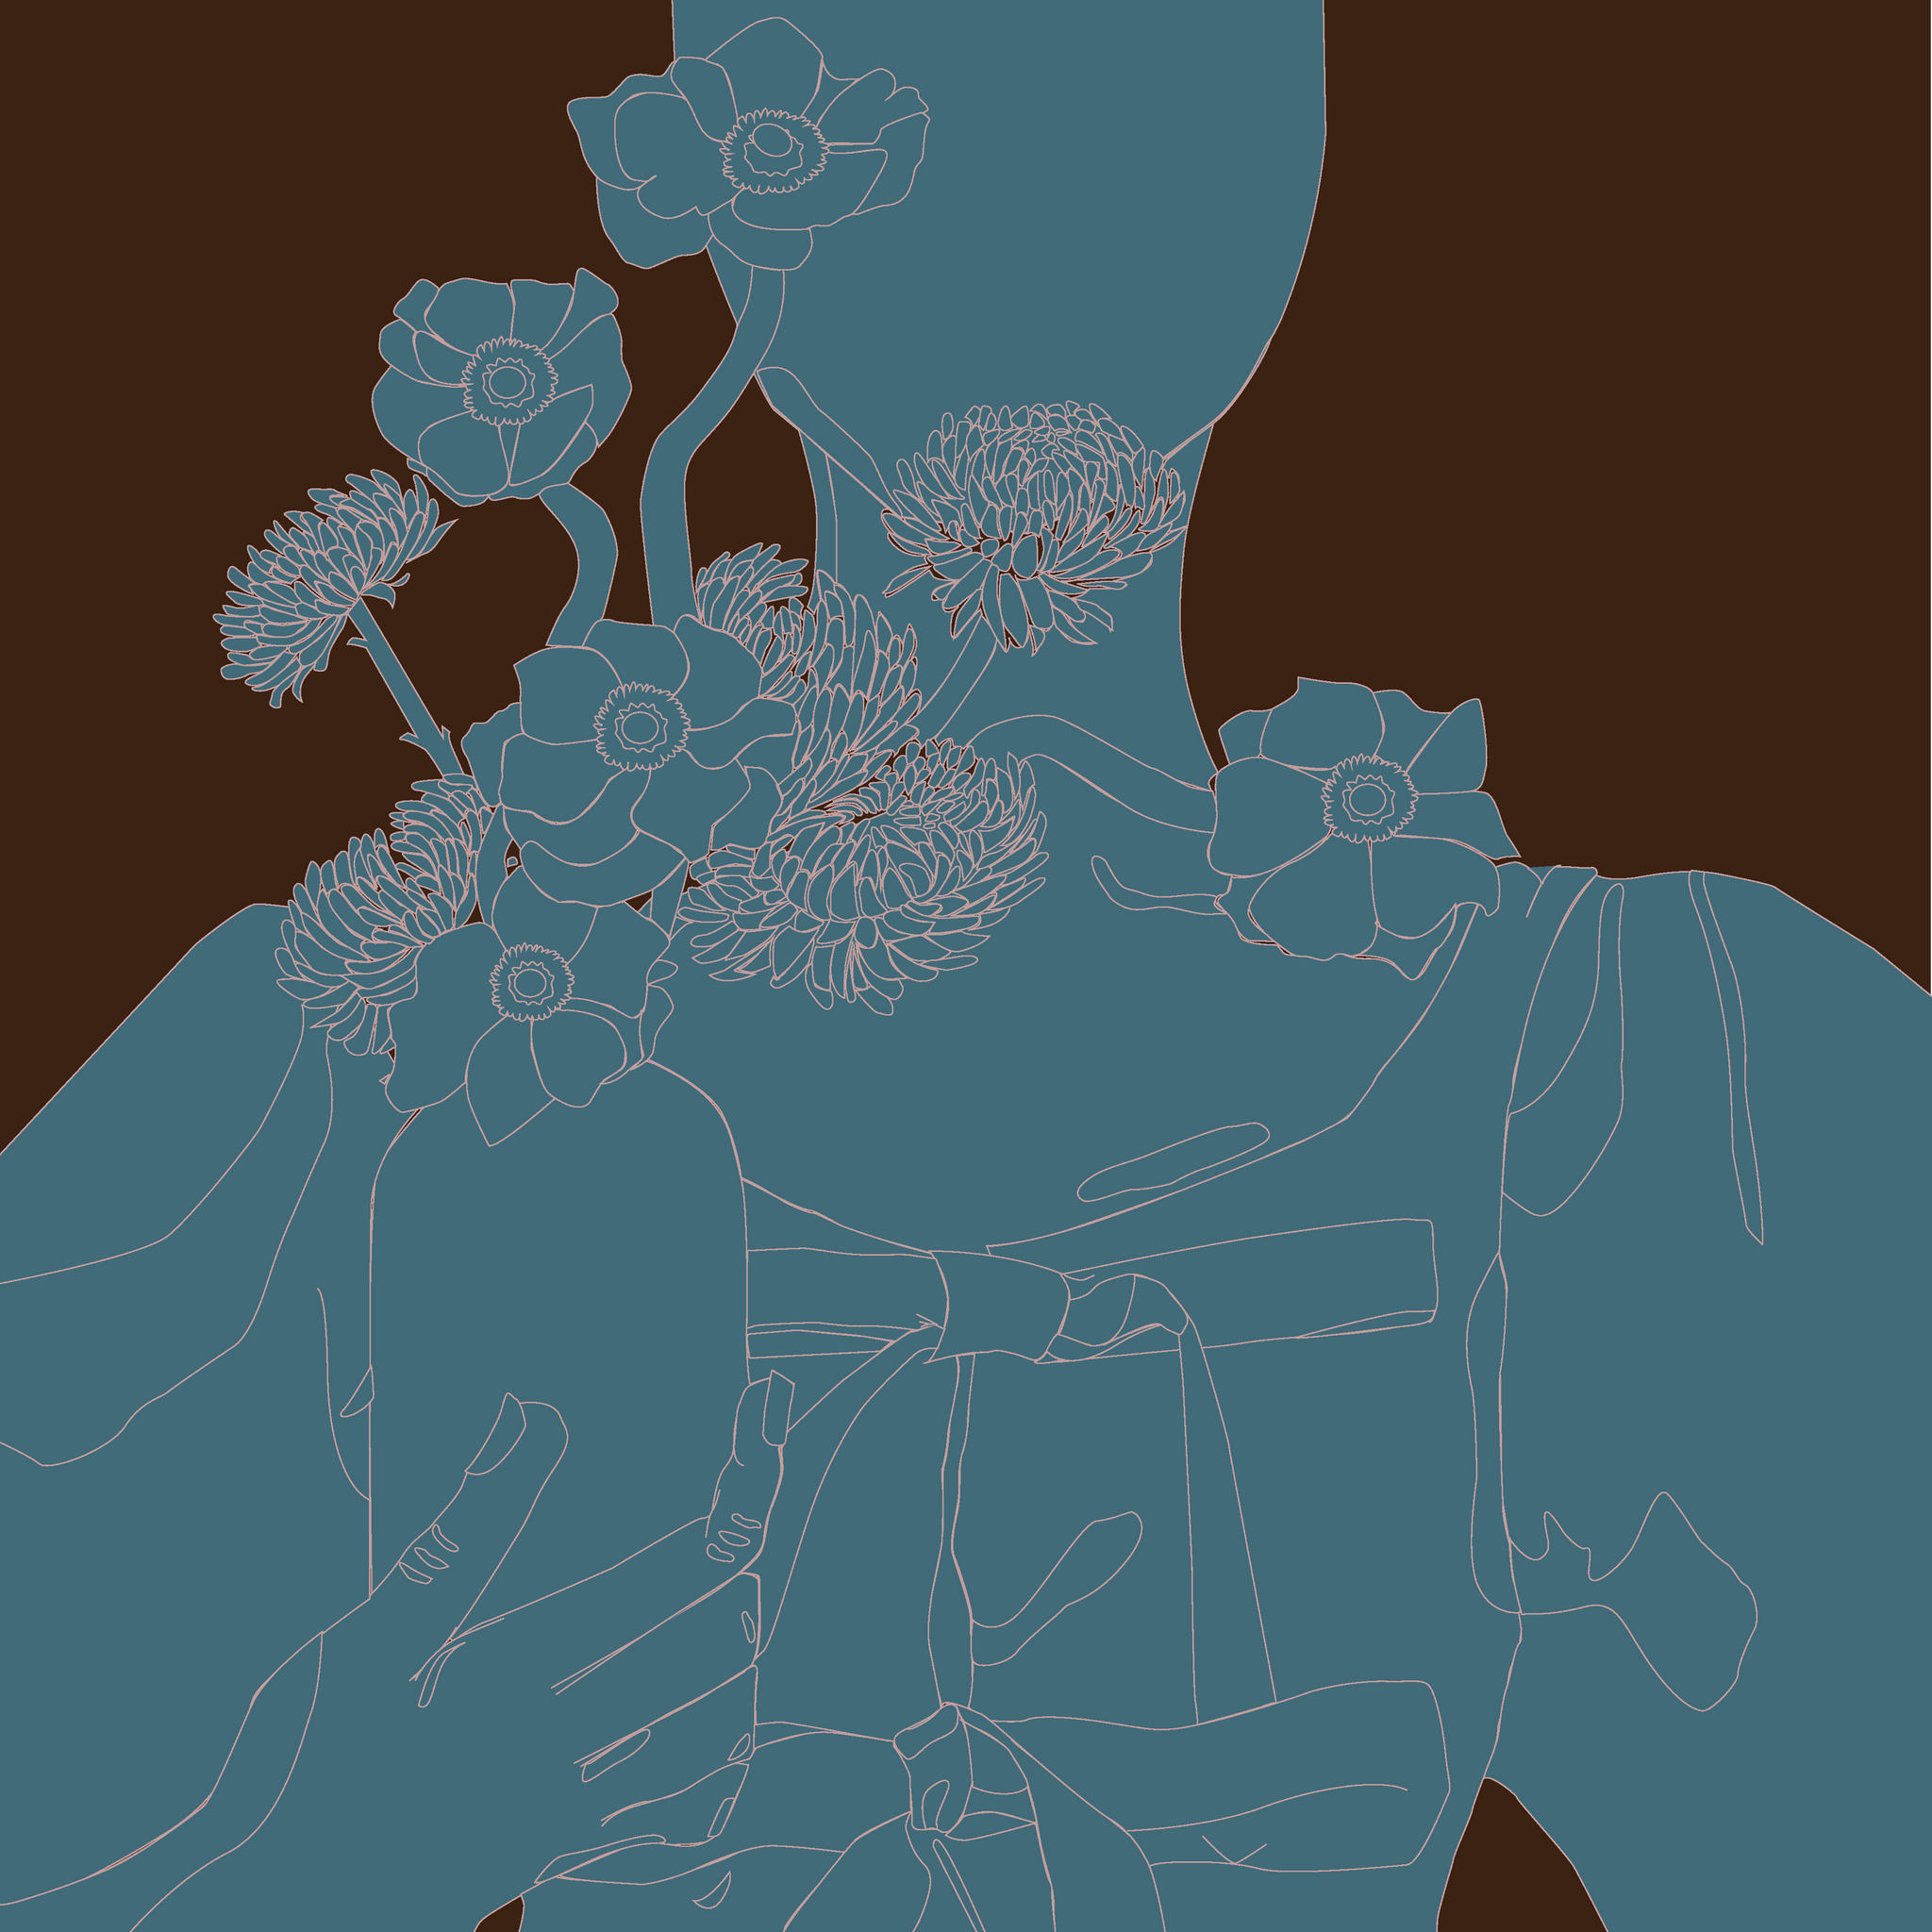 A monochrome blue graphic illustration of a woman in a top with bows holding a vase of flowers, with a brown background